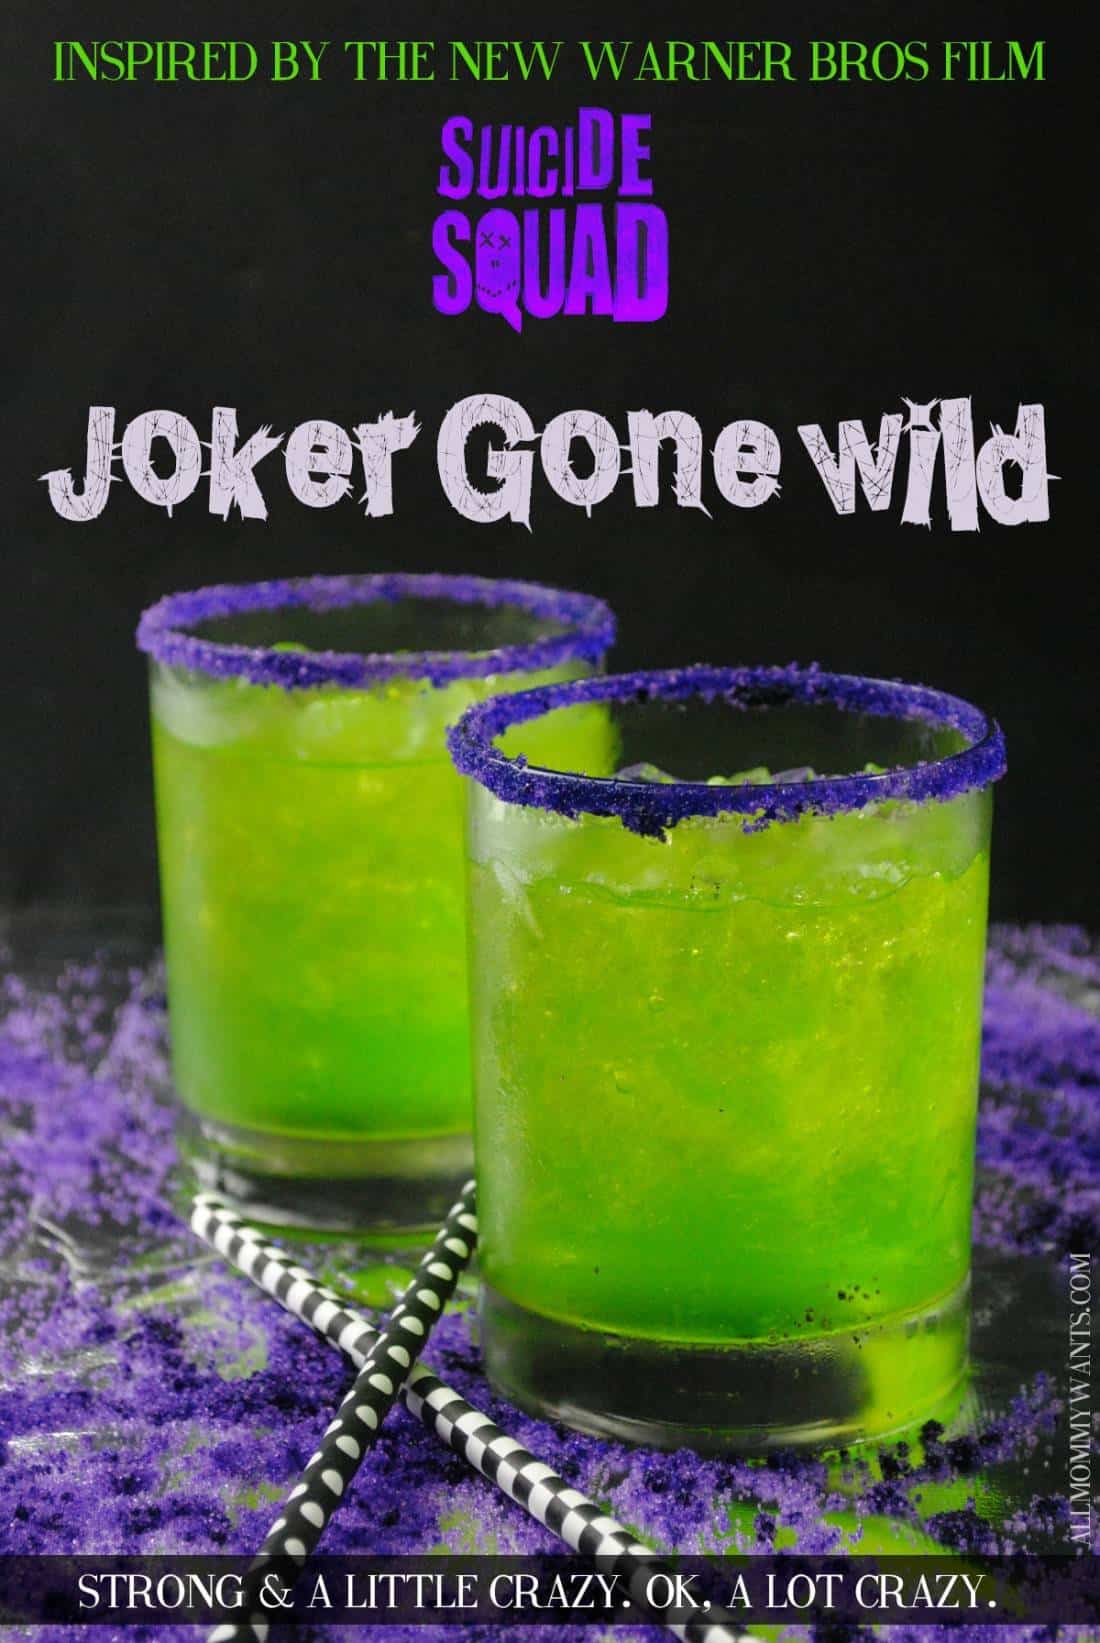 Suicide Squad Inspired Cocktail – The Joker Gone Wild